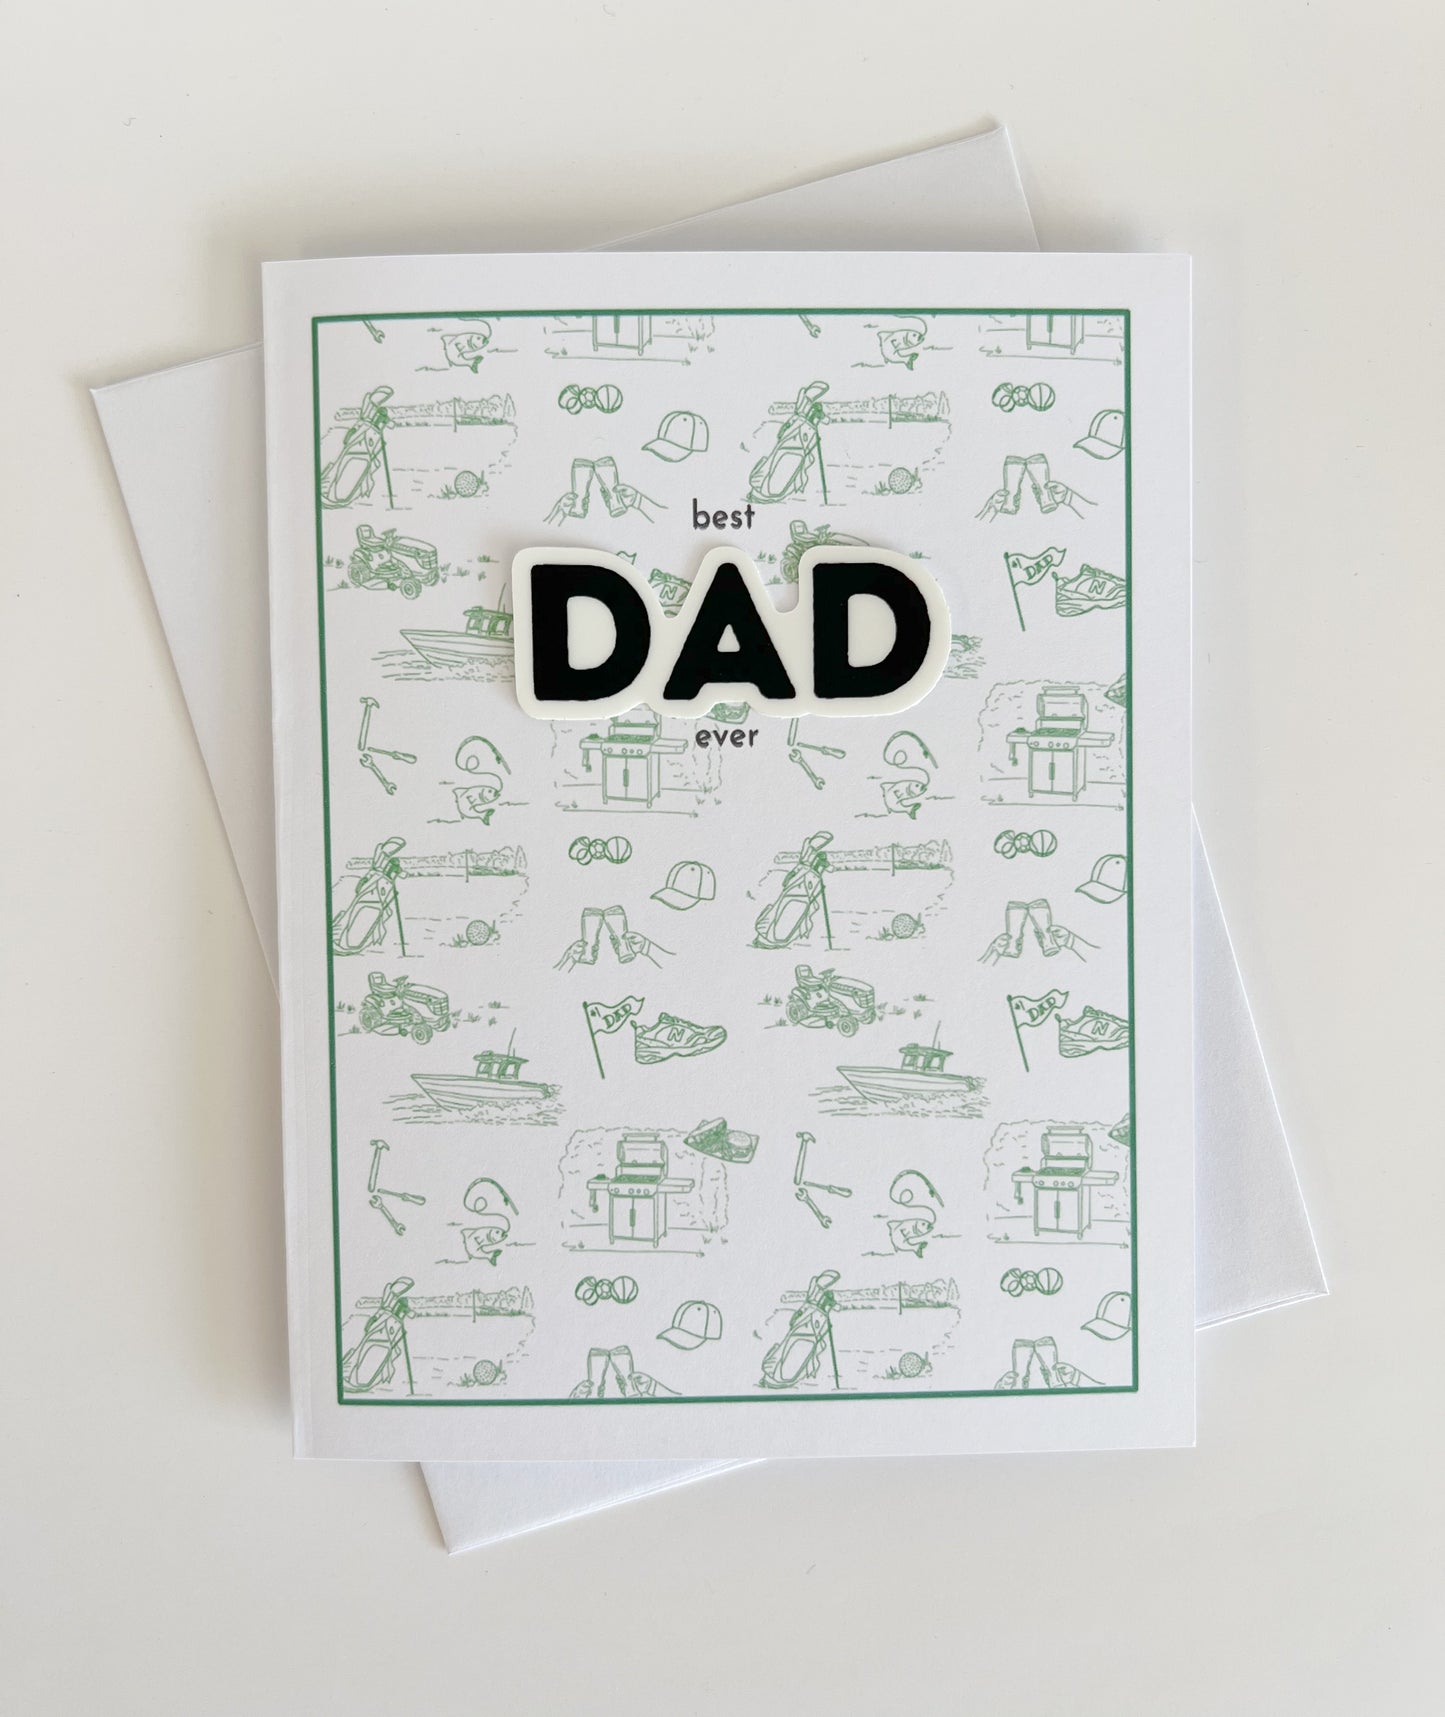 Best Dad Ever Toile Sticker Card - Father's Day - Gift for dad - Dad Toile notecard